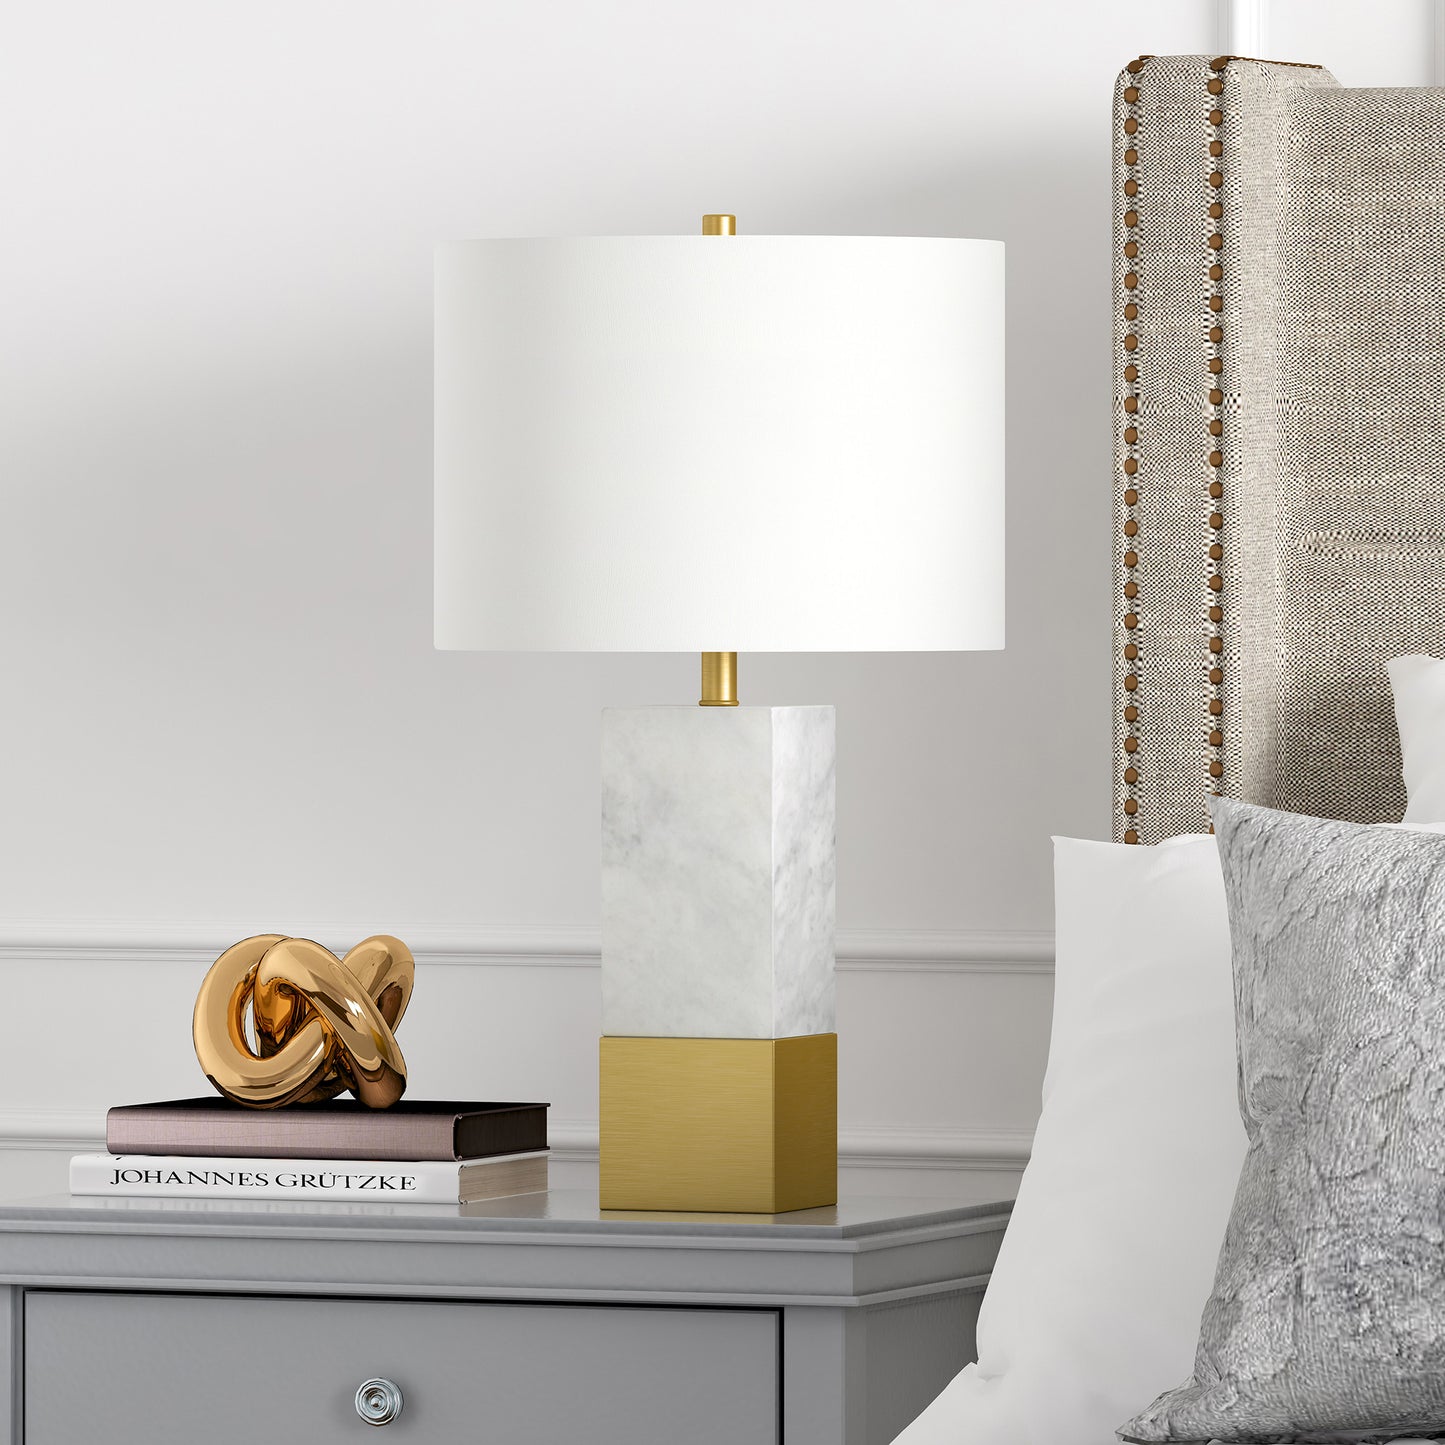 21" Gold and White Marble Table Lamp With White Drum Shade